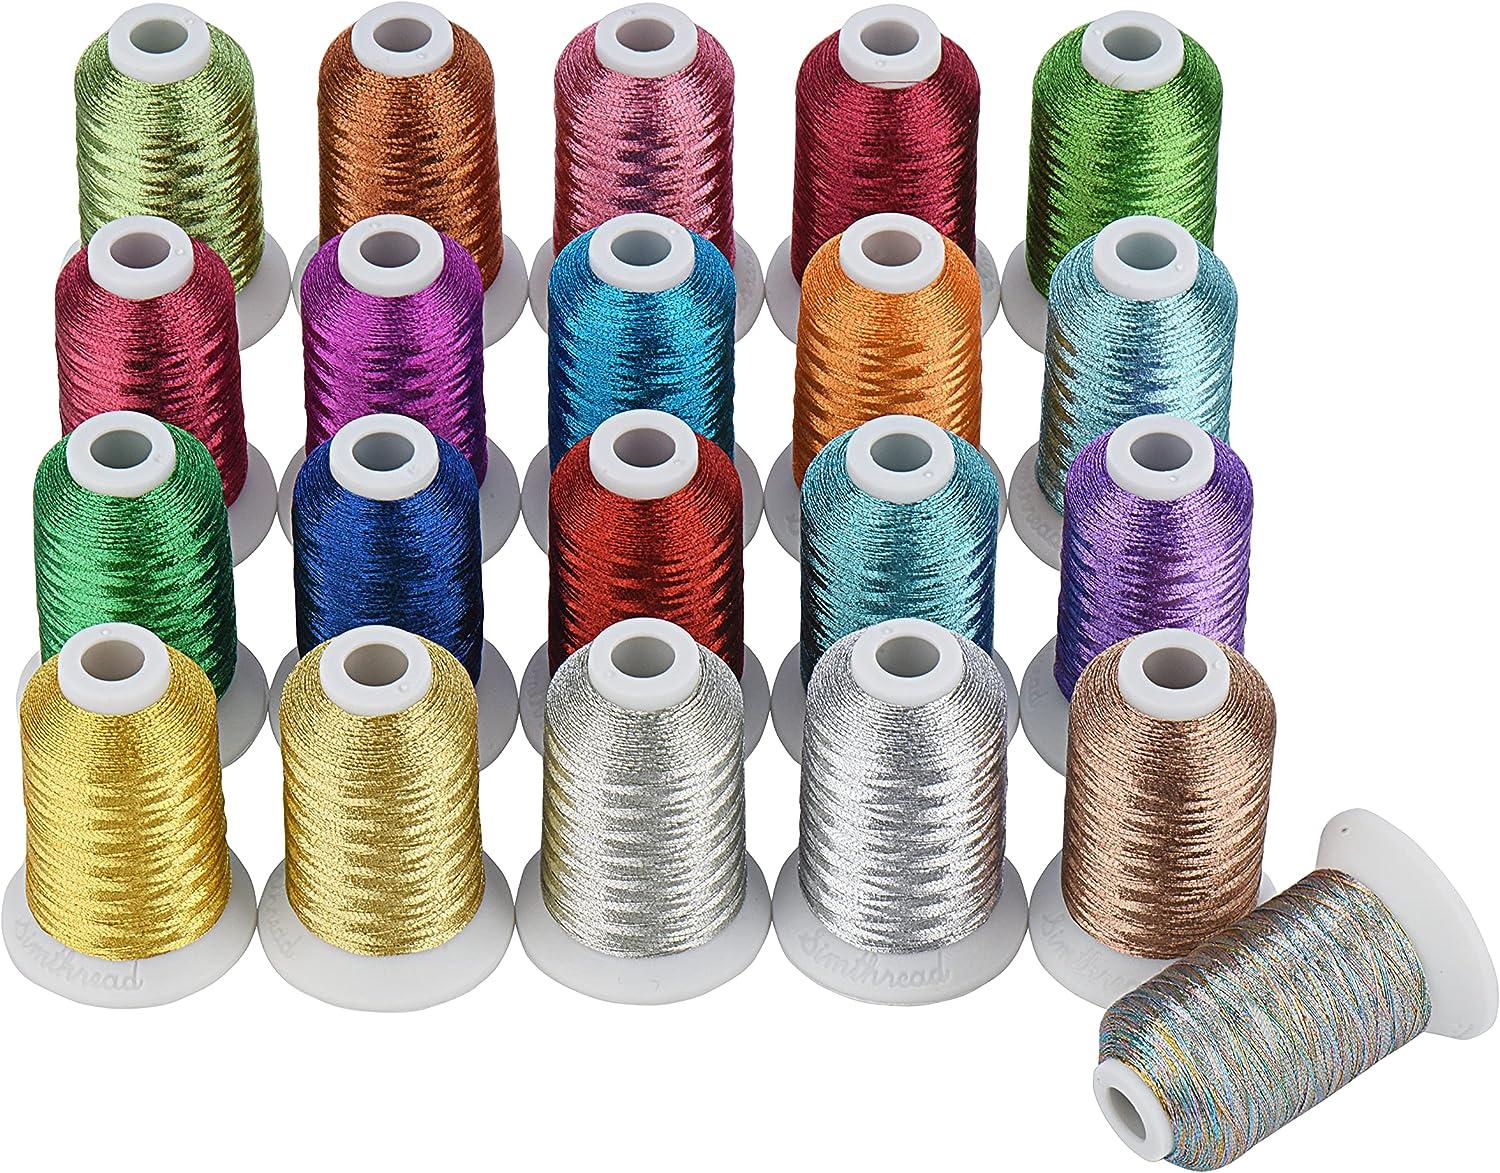 Premium metallic threads for machine embroidery and sewing